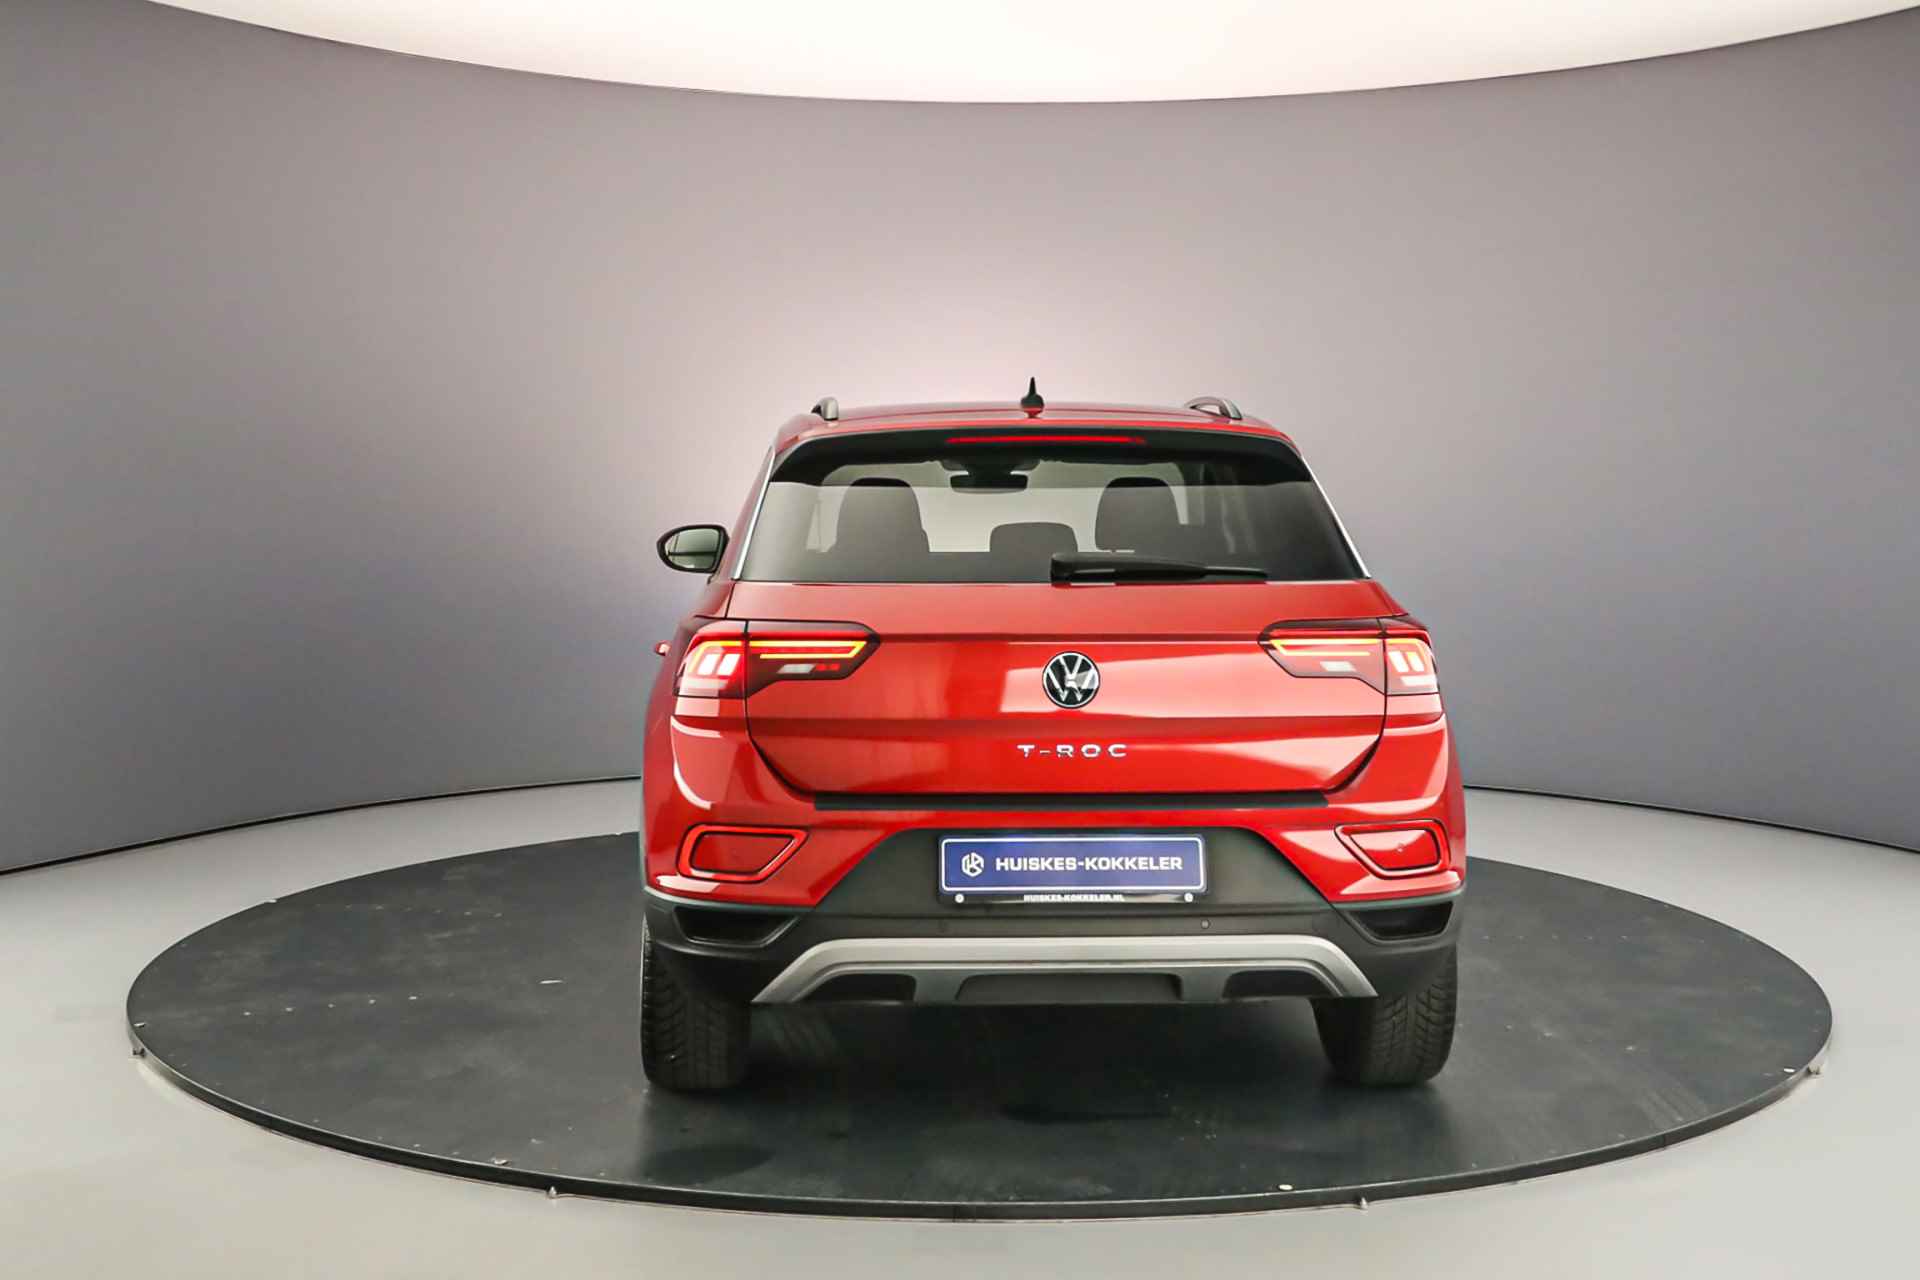 Volkswagen T-Roc Life 1.0 TSI 110pk Achteruitrijcamera, Adaptive cruise control, DAB, Airco, Parkeersensoren, App connect, LED verlichting, Parkeer assistent - 10/38